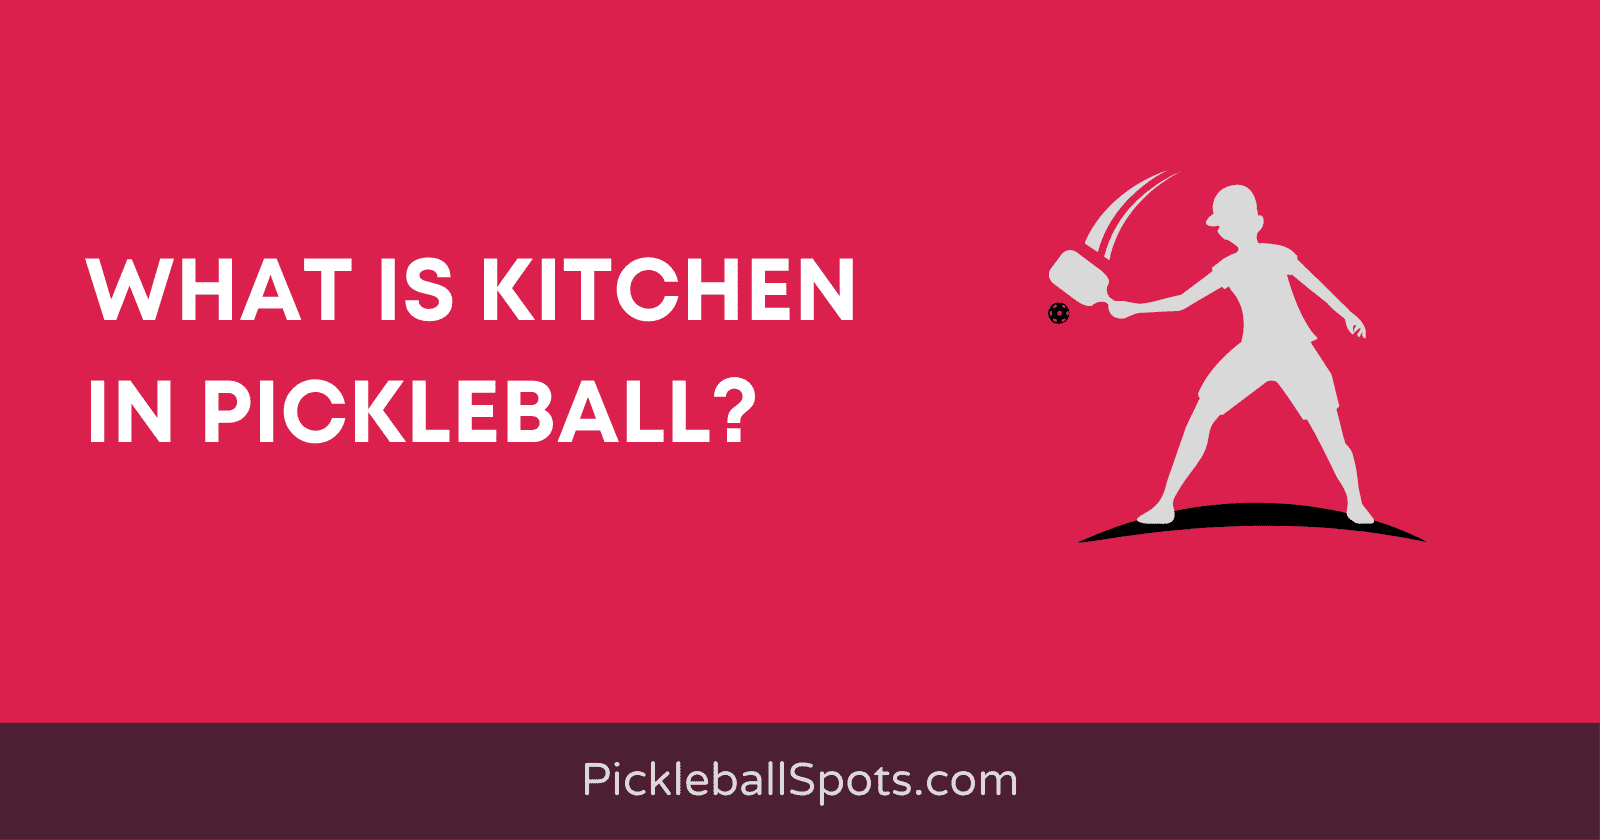 What Is Kitchen In Pickleball